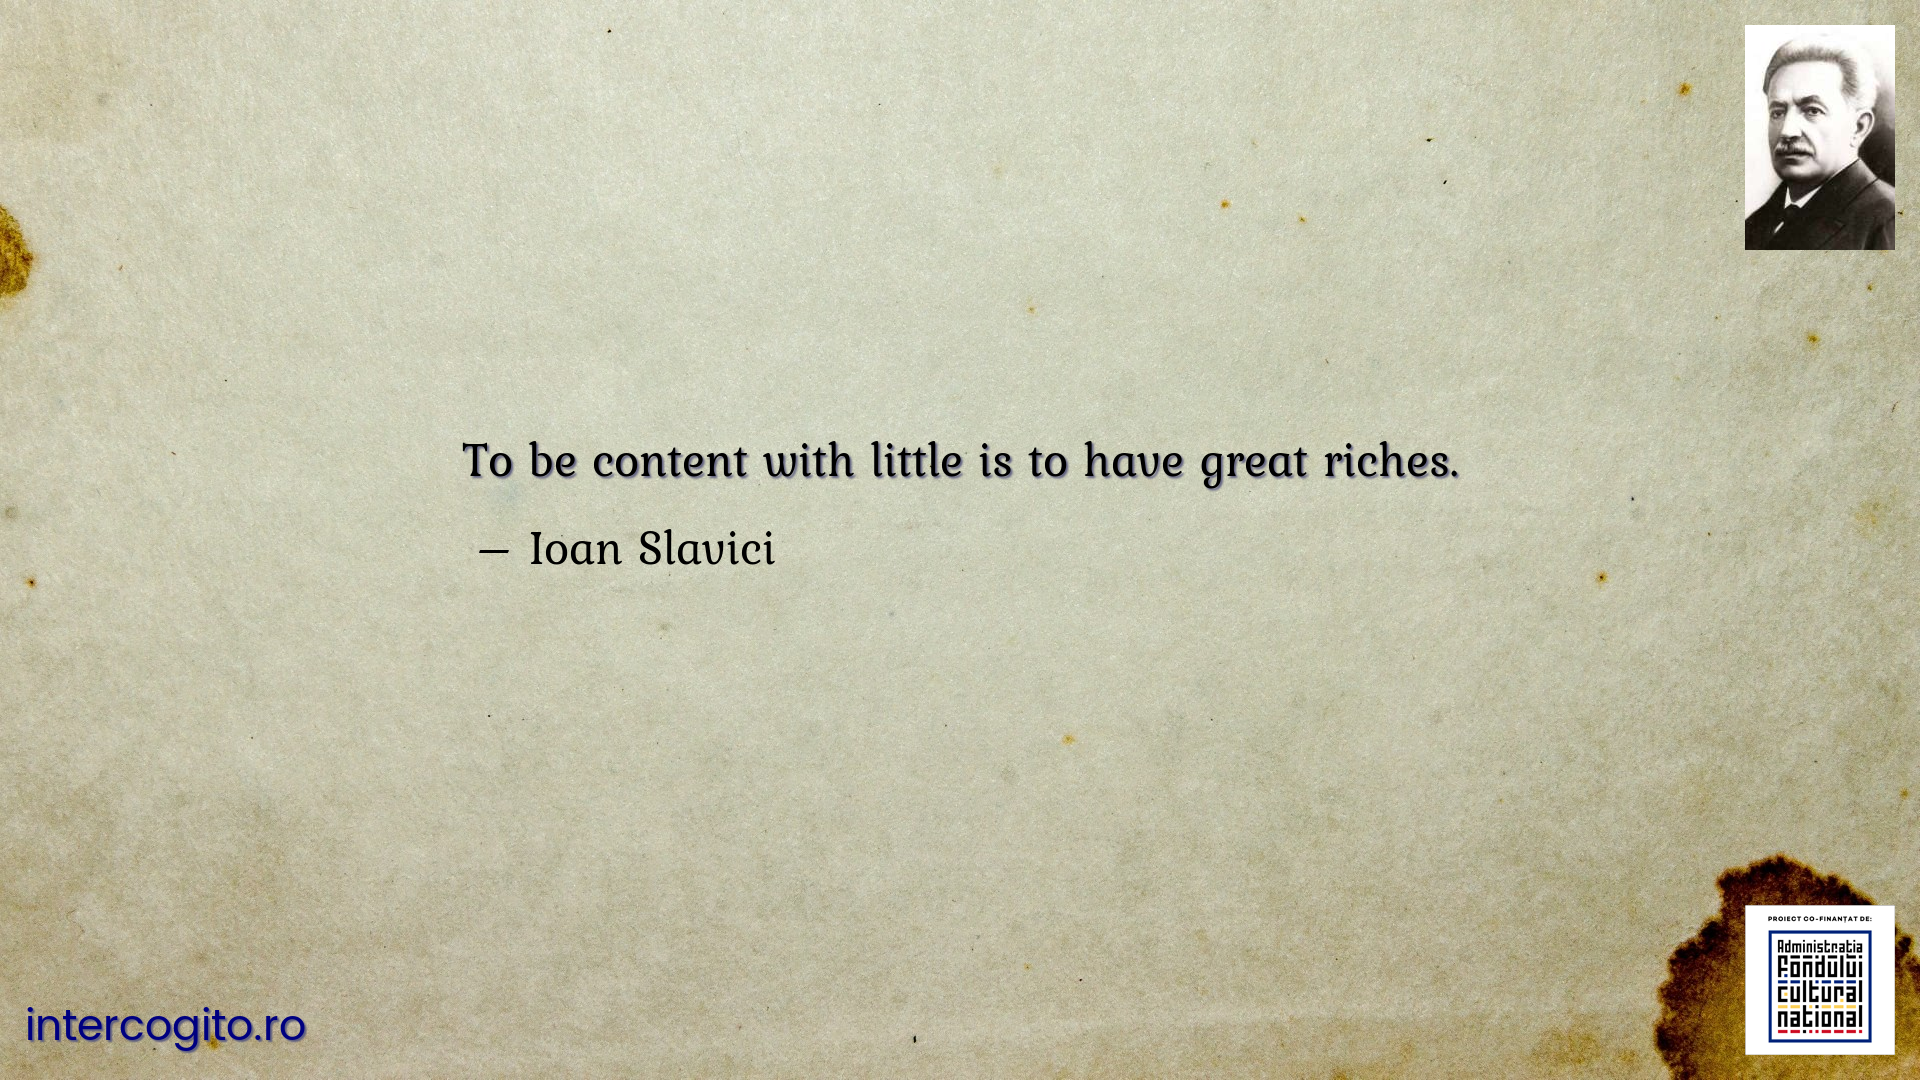 To be content with little is to have great riches.